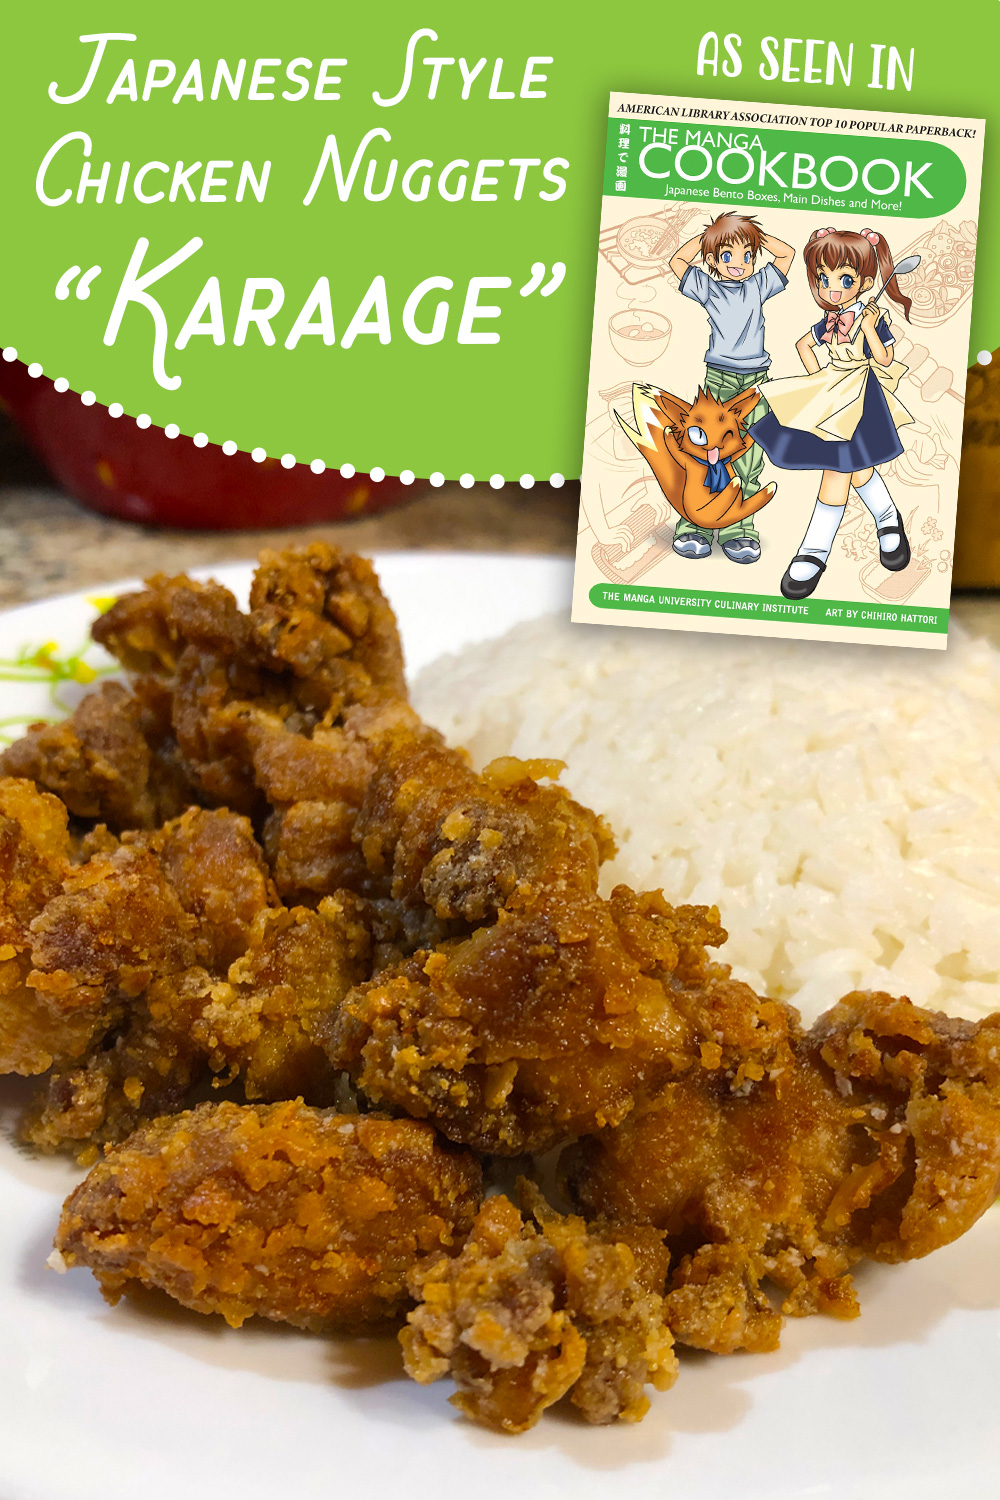 How to Make Karaage (Japanese style chicken nuggets)